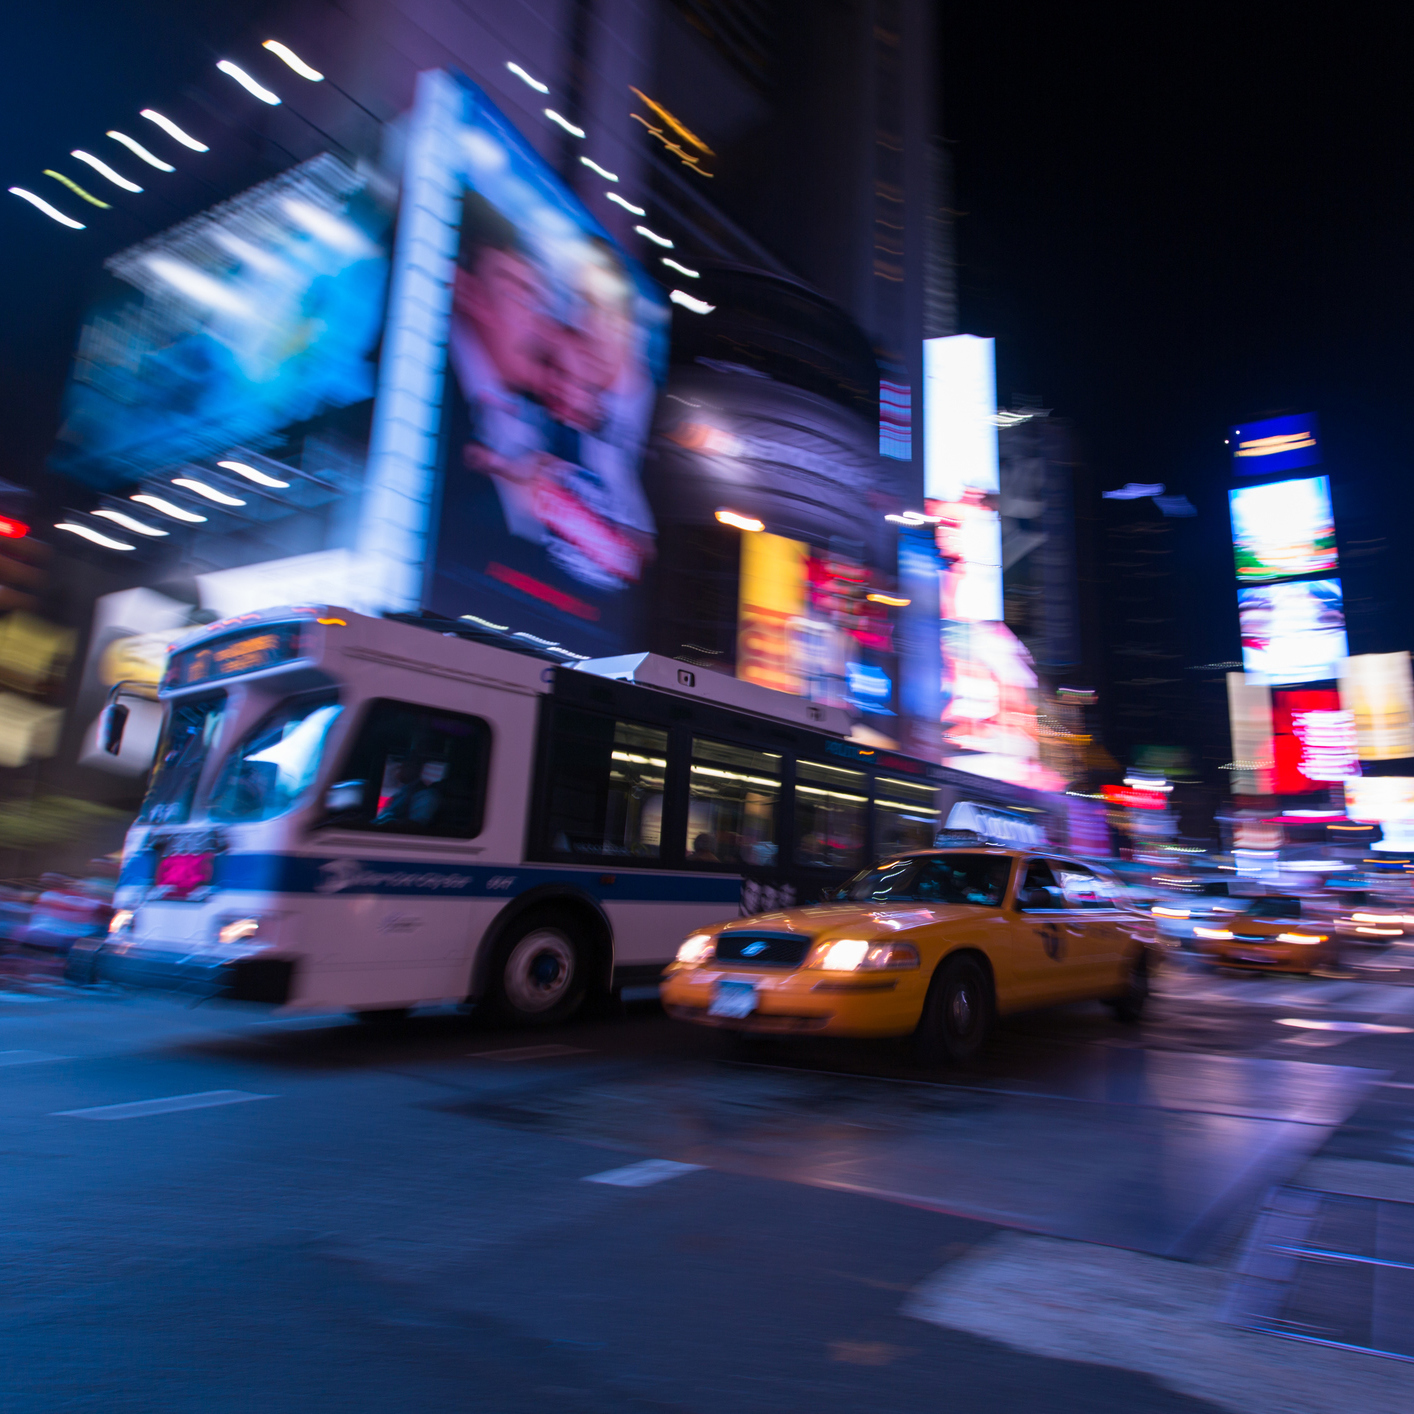 A long exposure night shot of a bus and a yellow cab driving through Times Square, NYC.